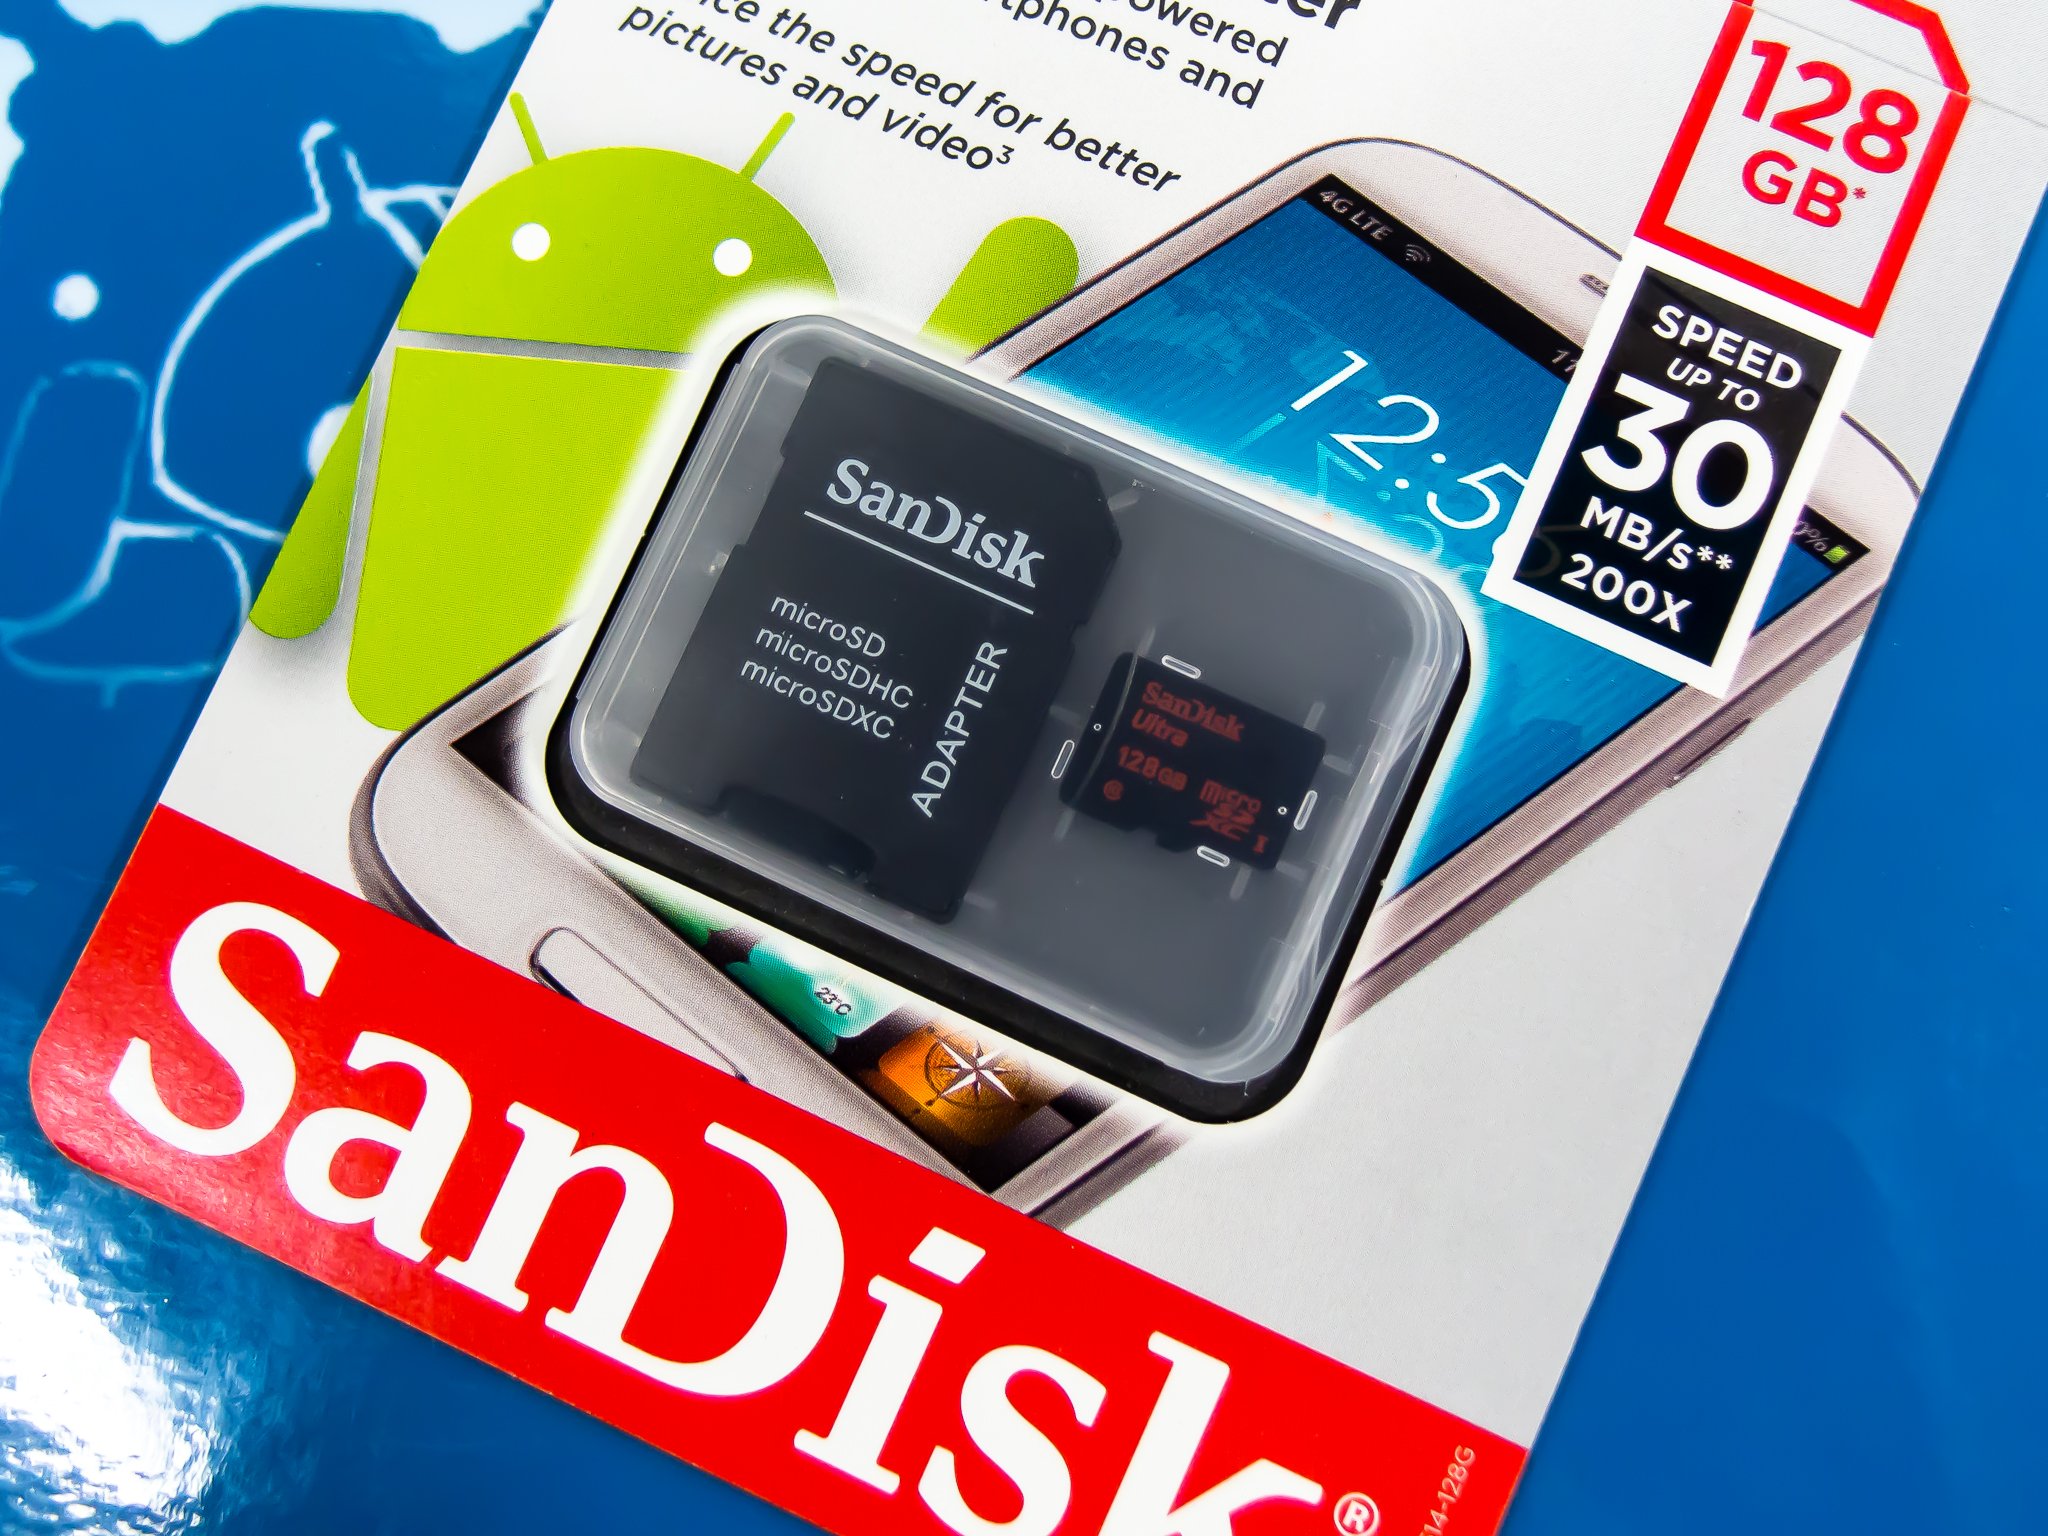 Everything you need to know about SD card speeds and your phone